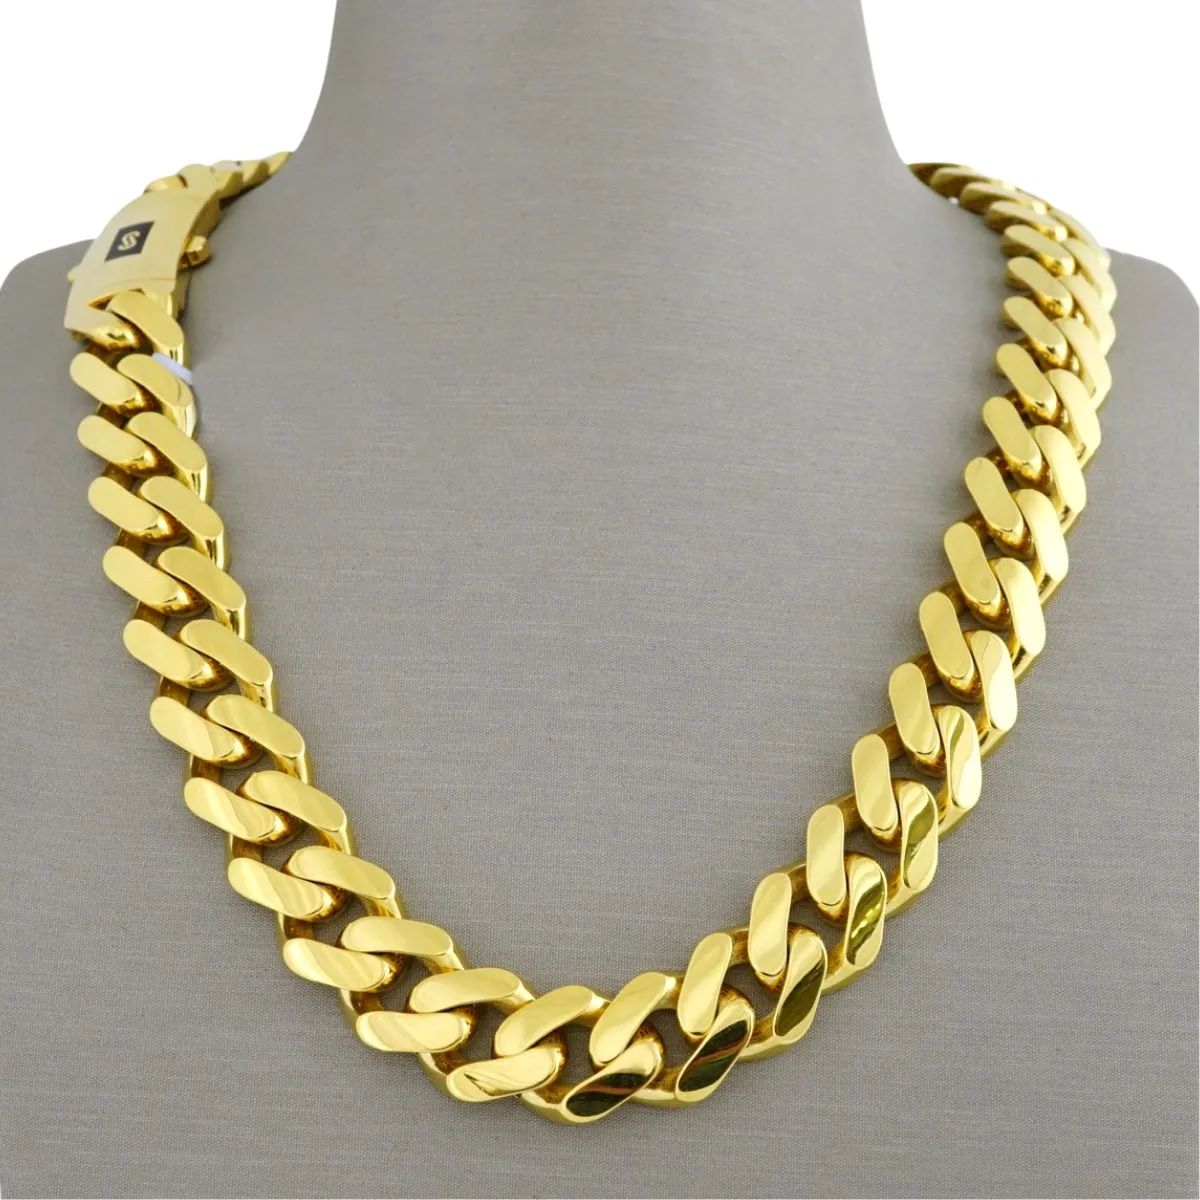 How To Store Gold Chains | Storables